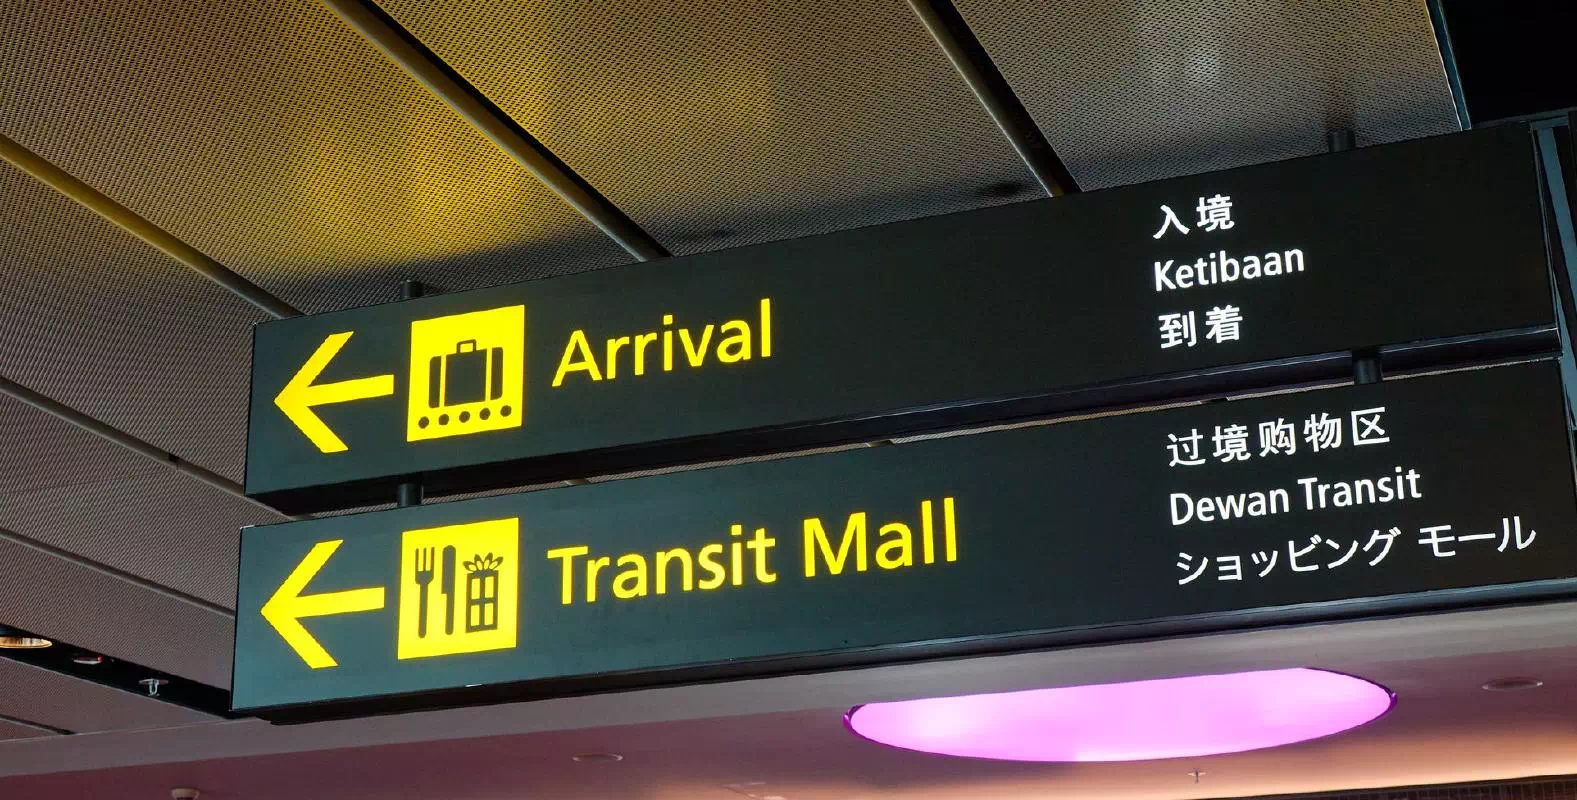 Singapore Changi Airport (SIN) Shared Transfer Service